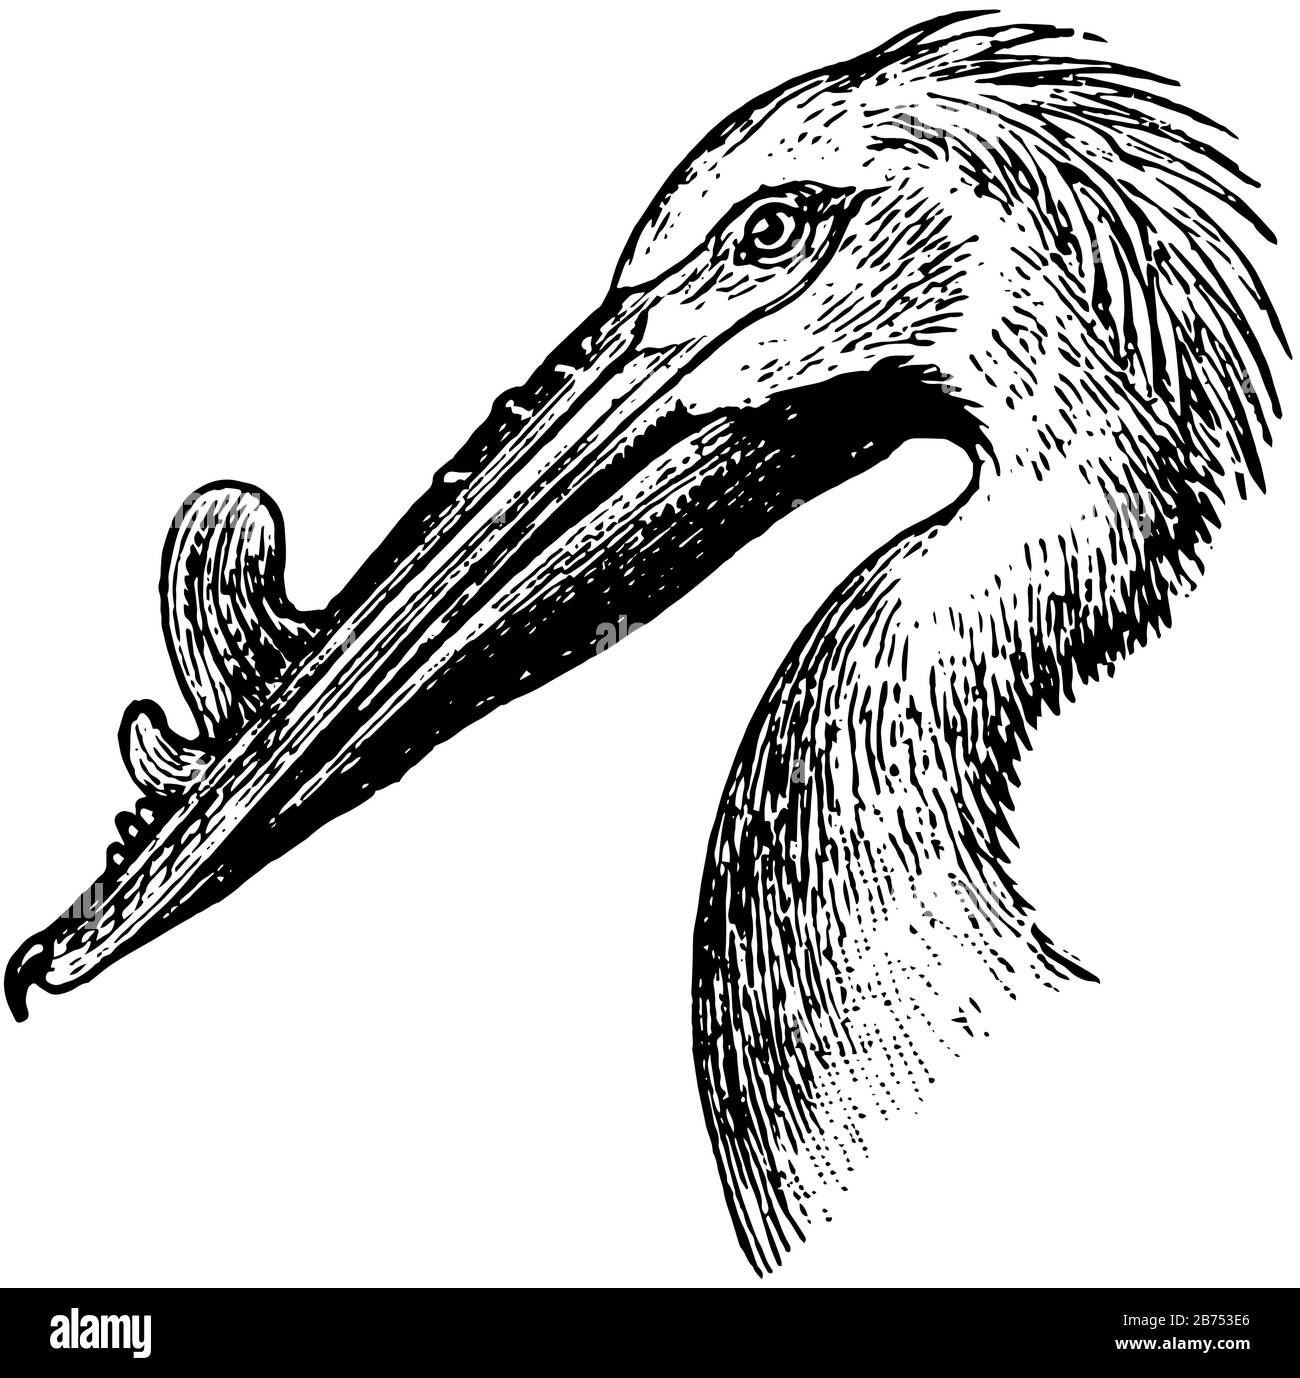 Rough Billed Pelican having a beak with many protrusions, vintage line drawing or engraving illustration. Stock Vector